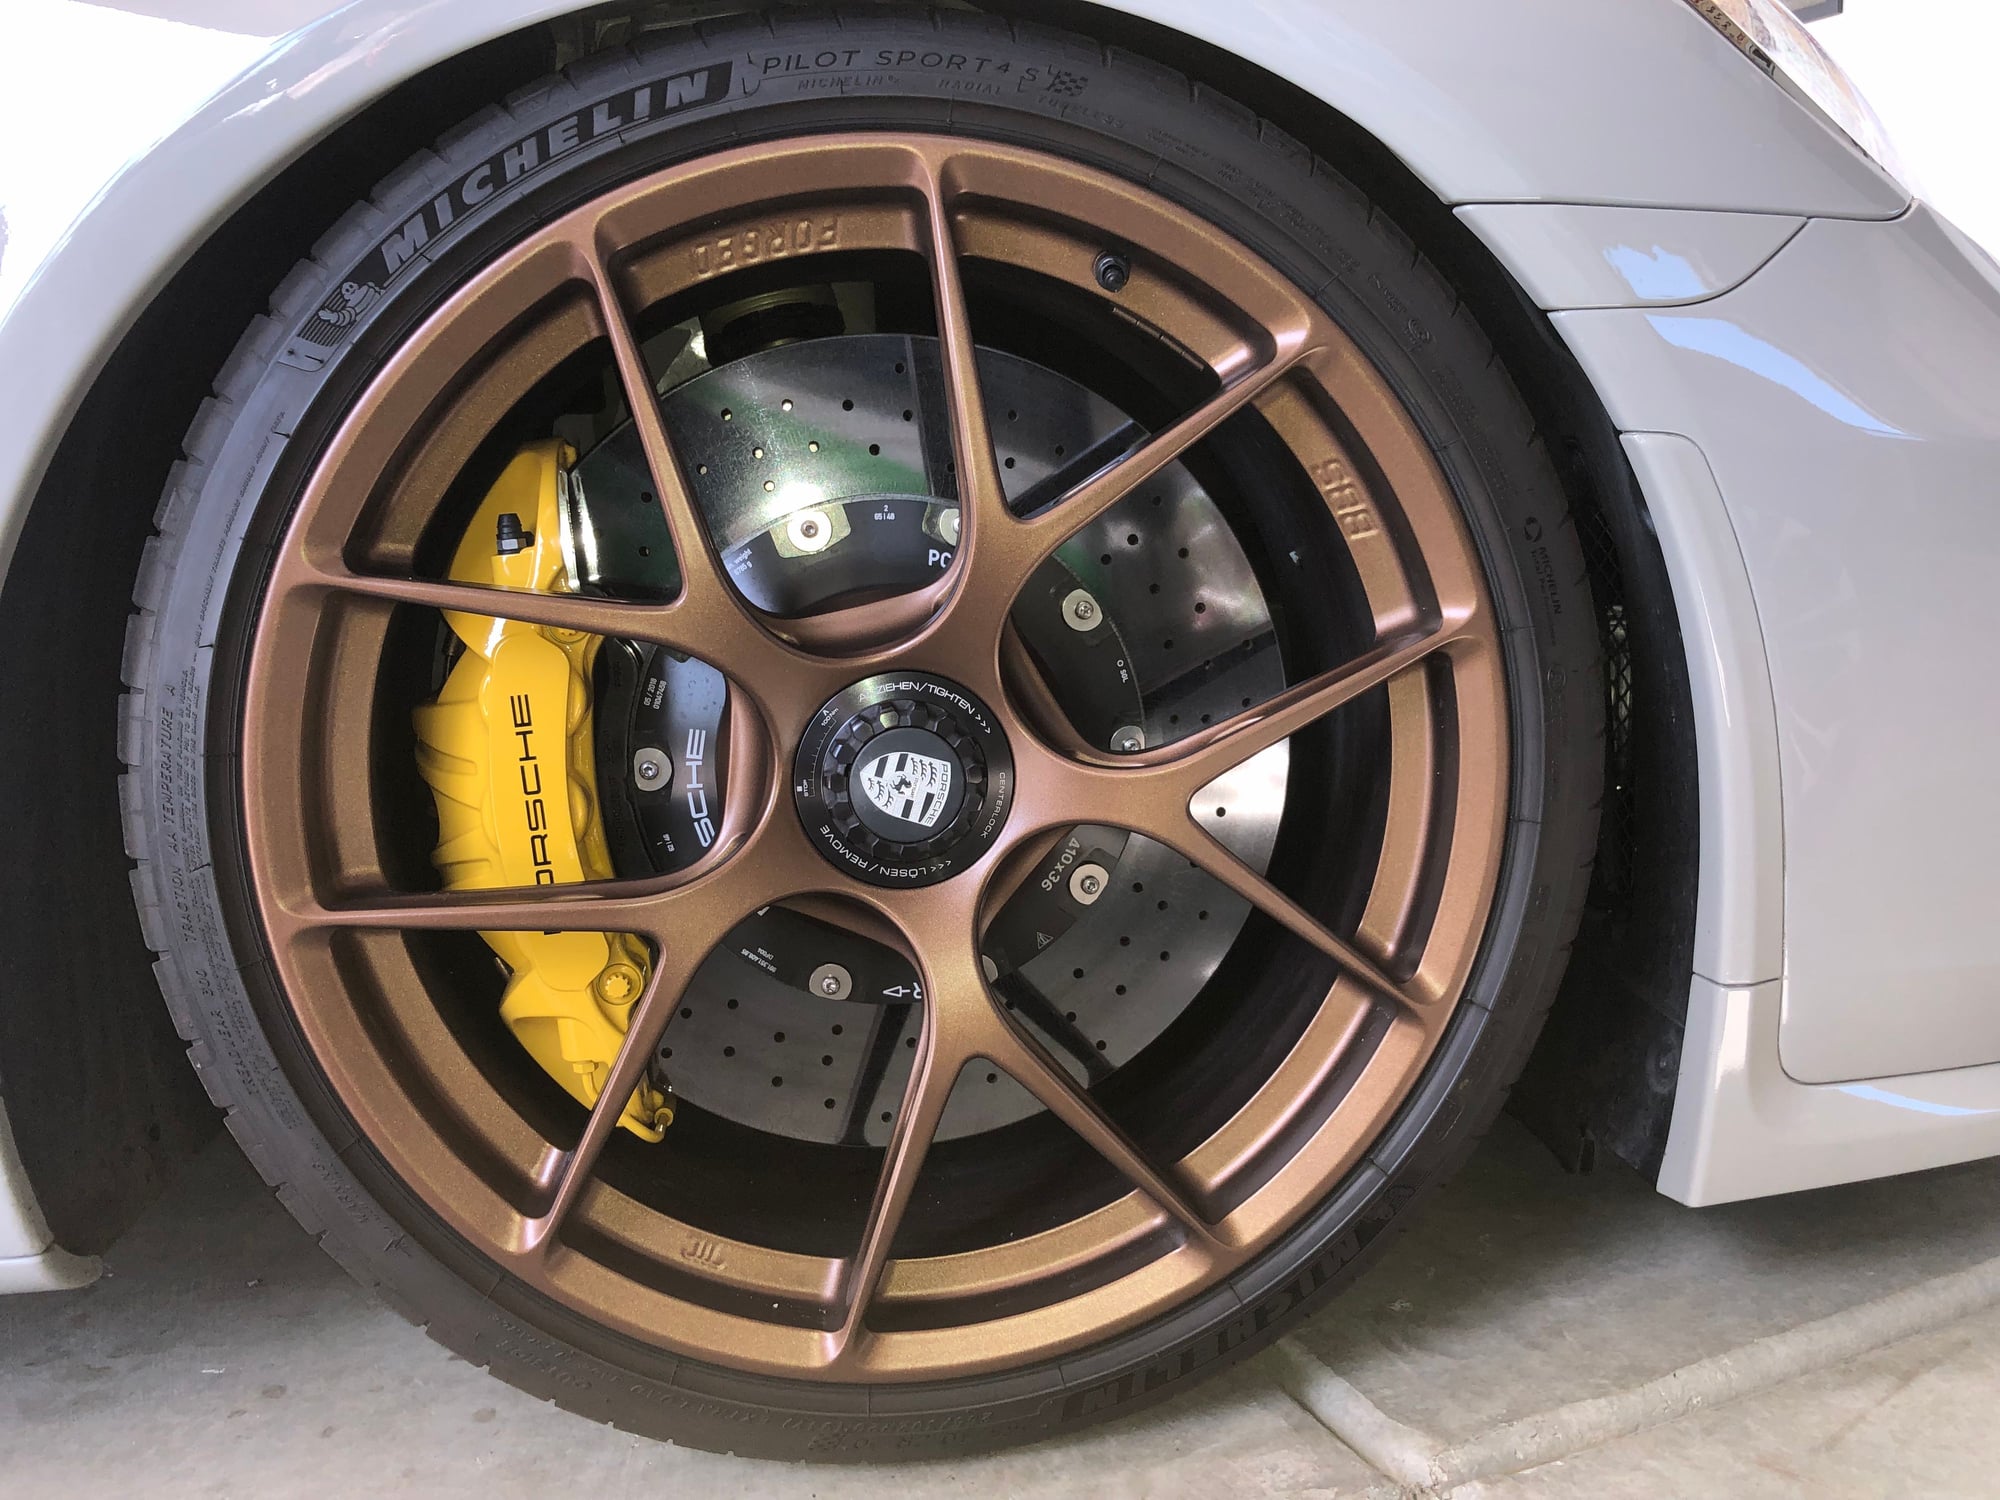 Wheels and Tires/Axles - FS: BBS FI-R Wheels - Used - 2014 to 2019 Porsche GT3 - Temecula, CA 92592, United States